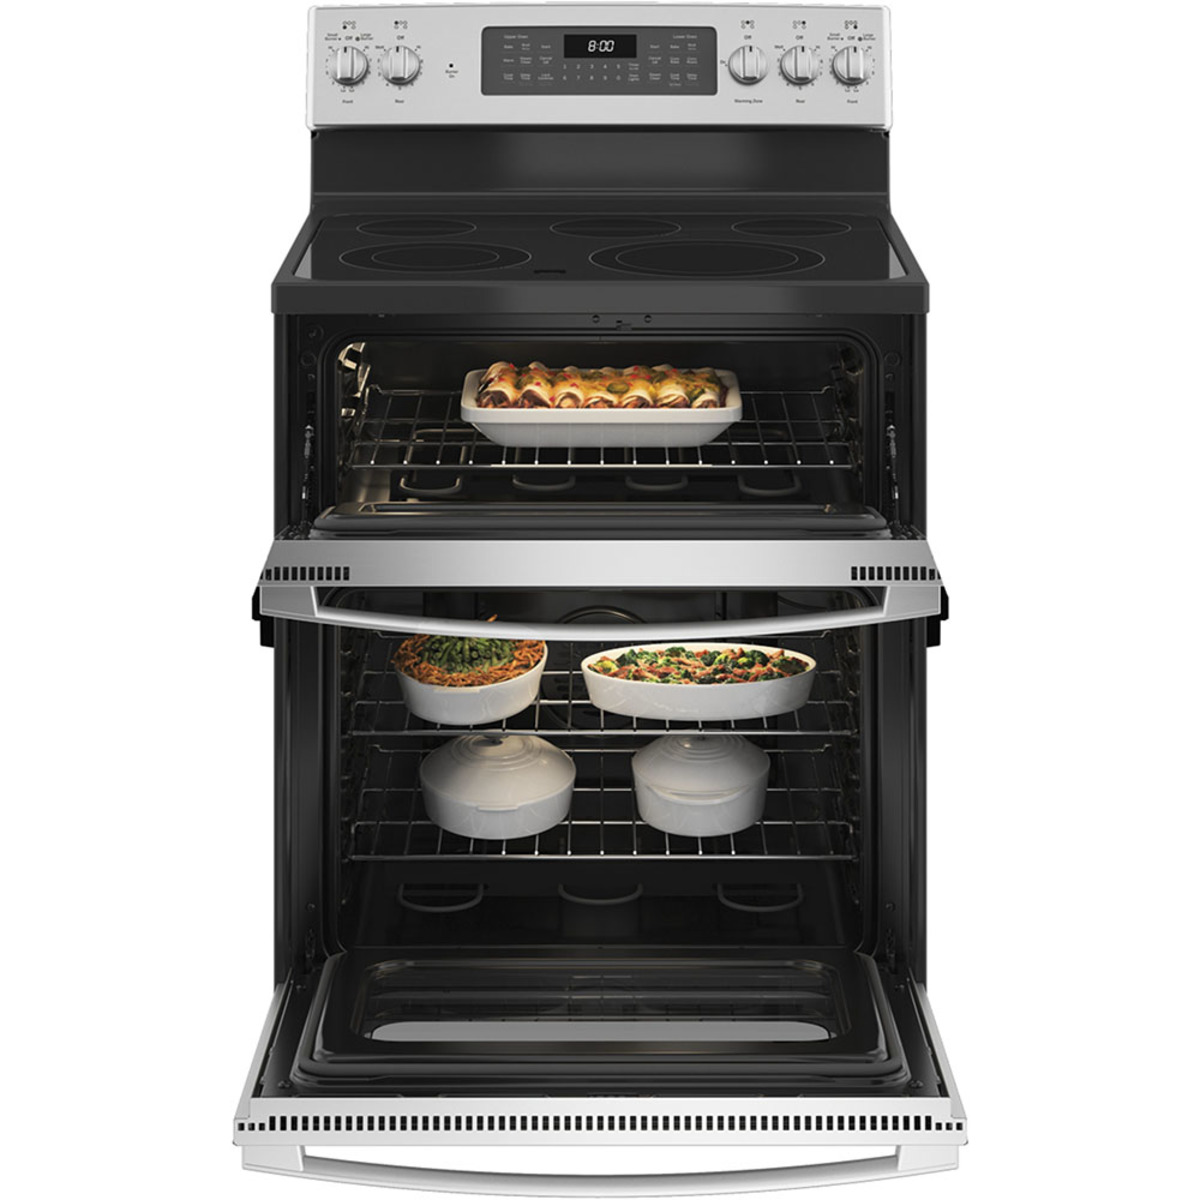 GE® 30 Free-Standing Electric Double Oven Convection Range Stainless Steel  - JBS86SPSS, Ranges, Cooking